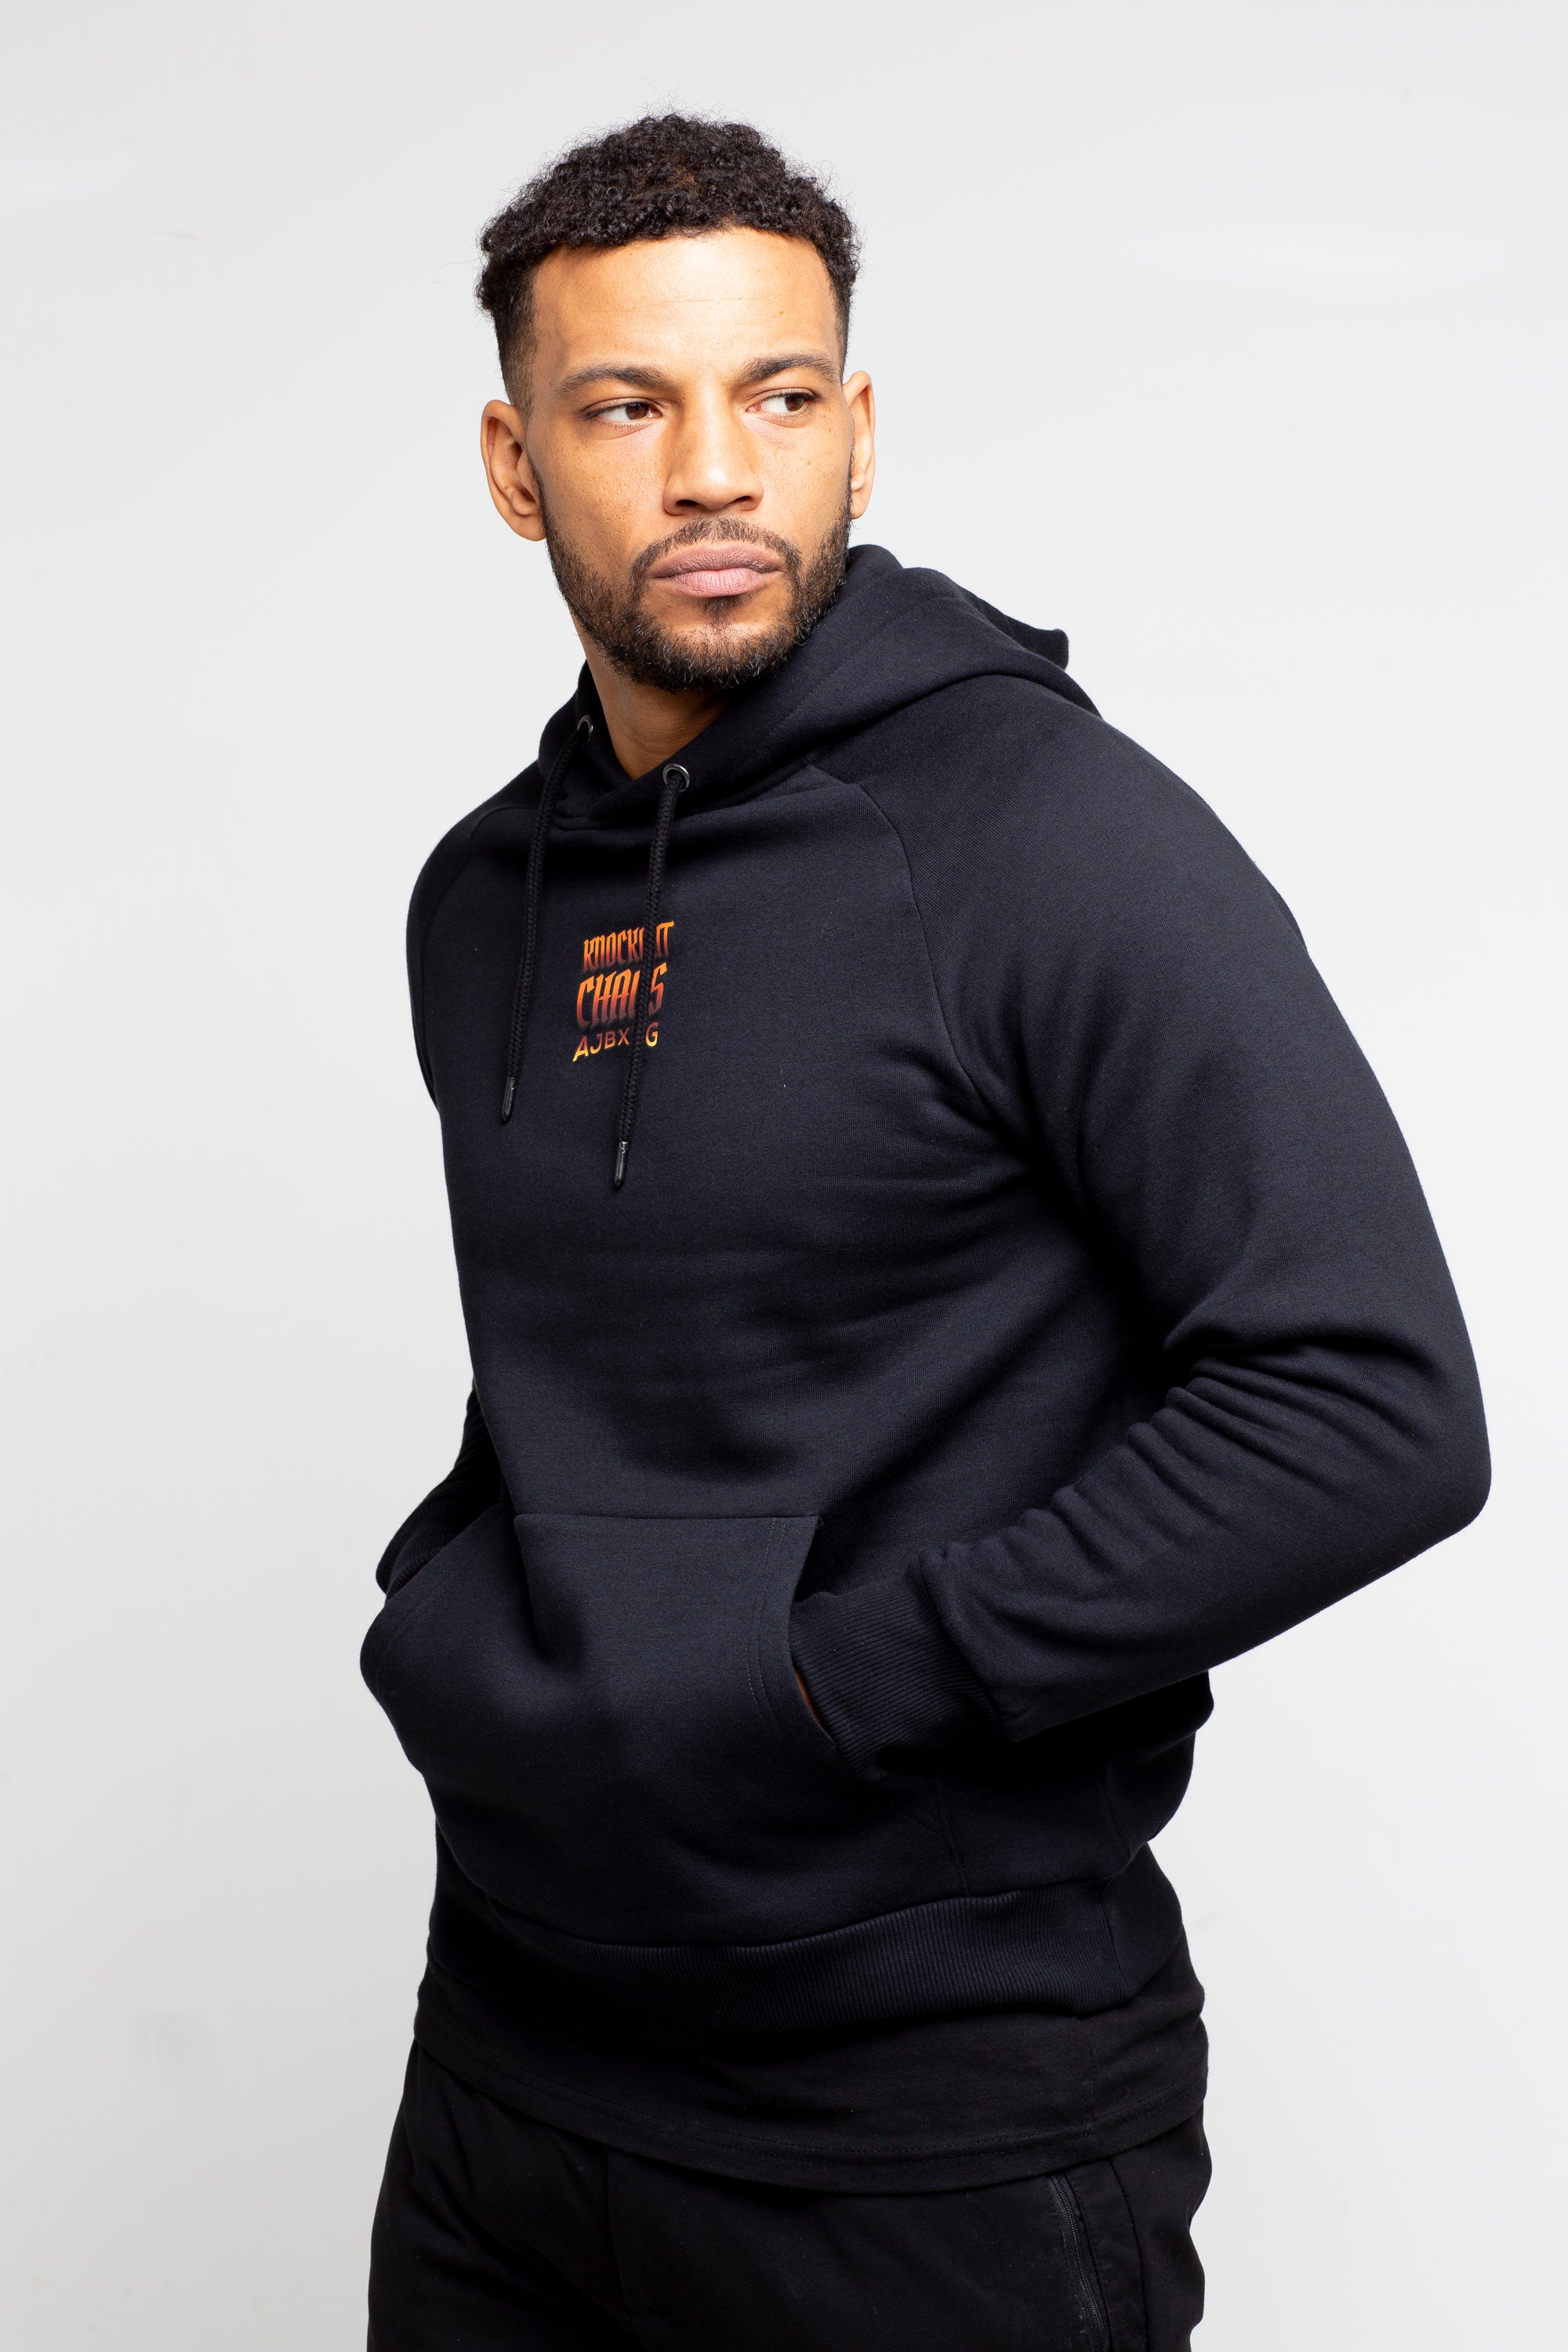 Fight Night 'Knock Out Chaos" Hoodie - Burnt Orange Logo